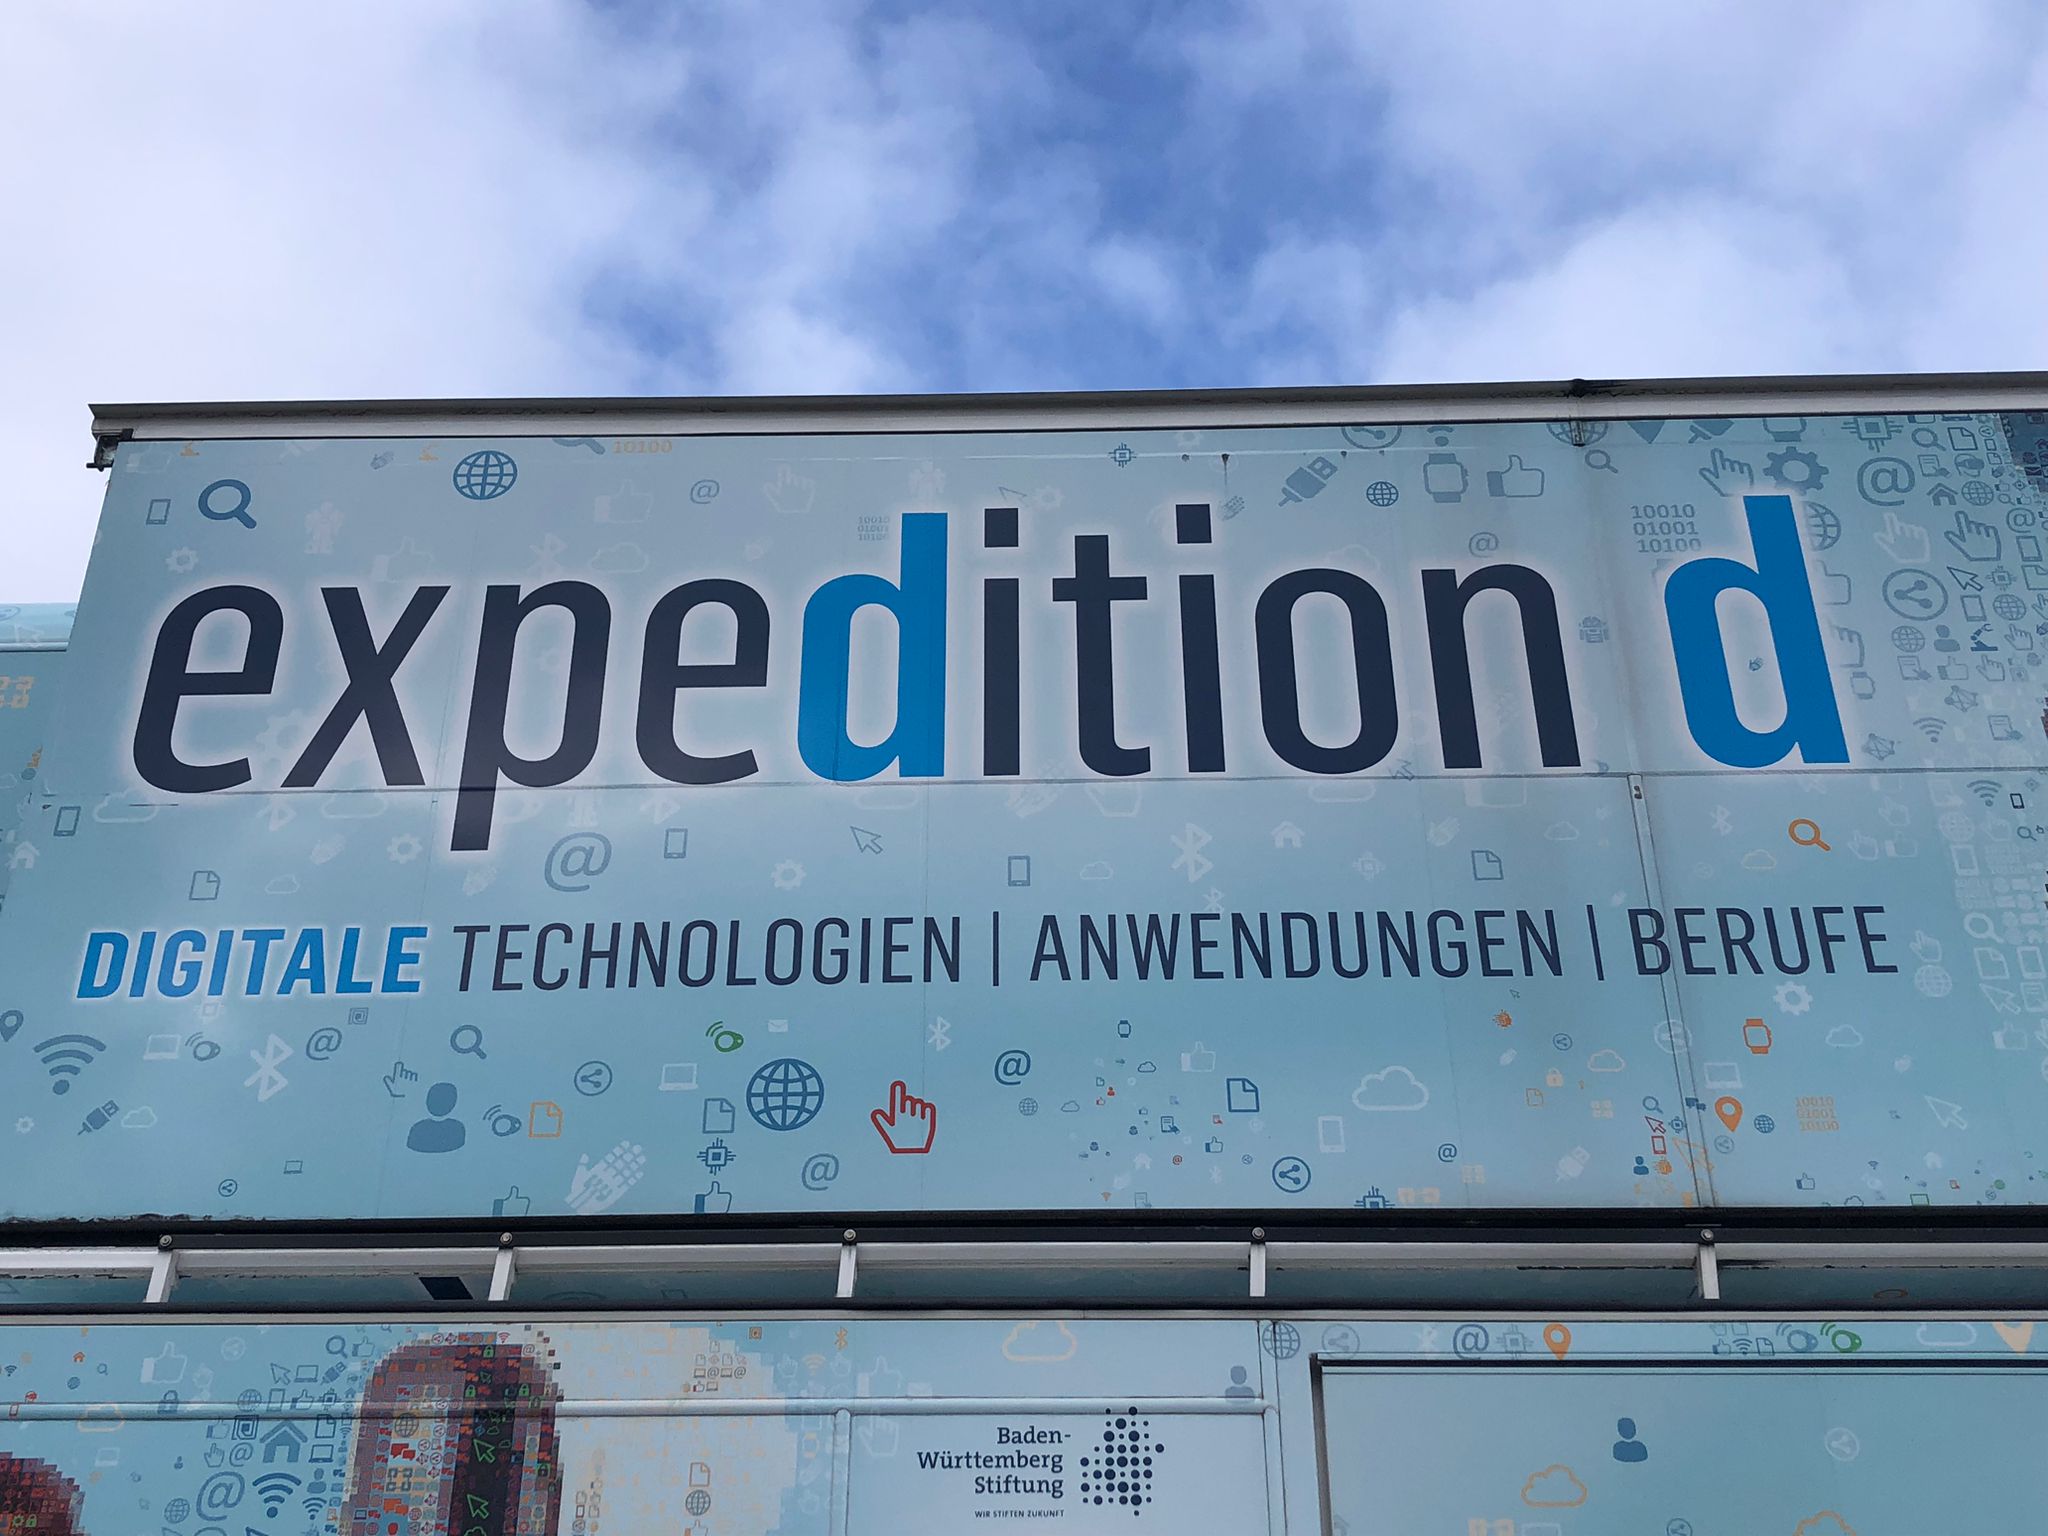  expedition d 